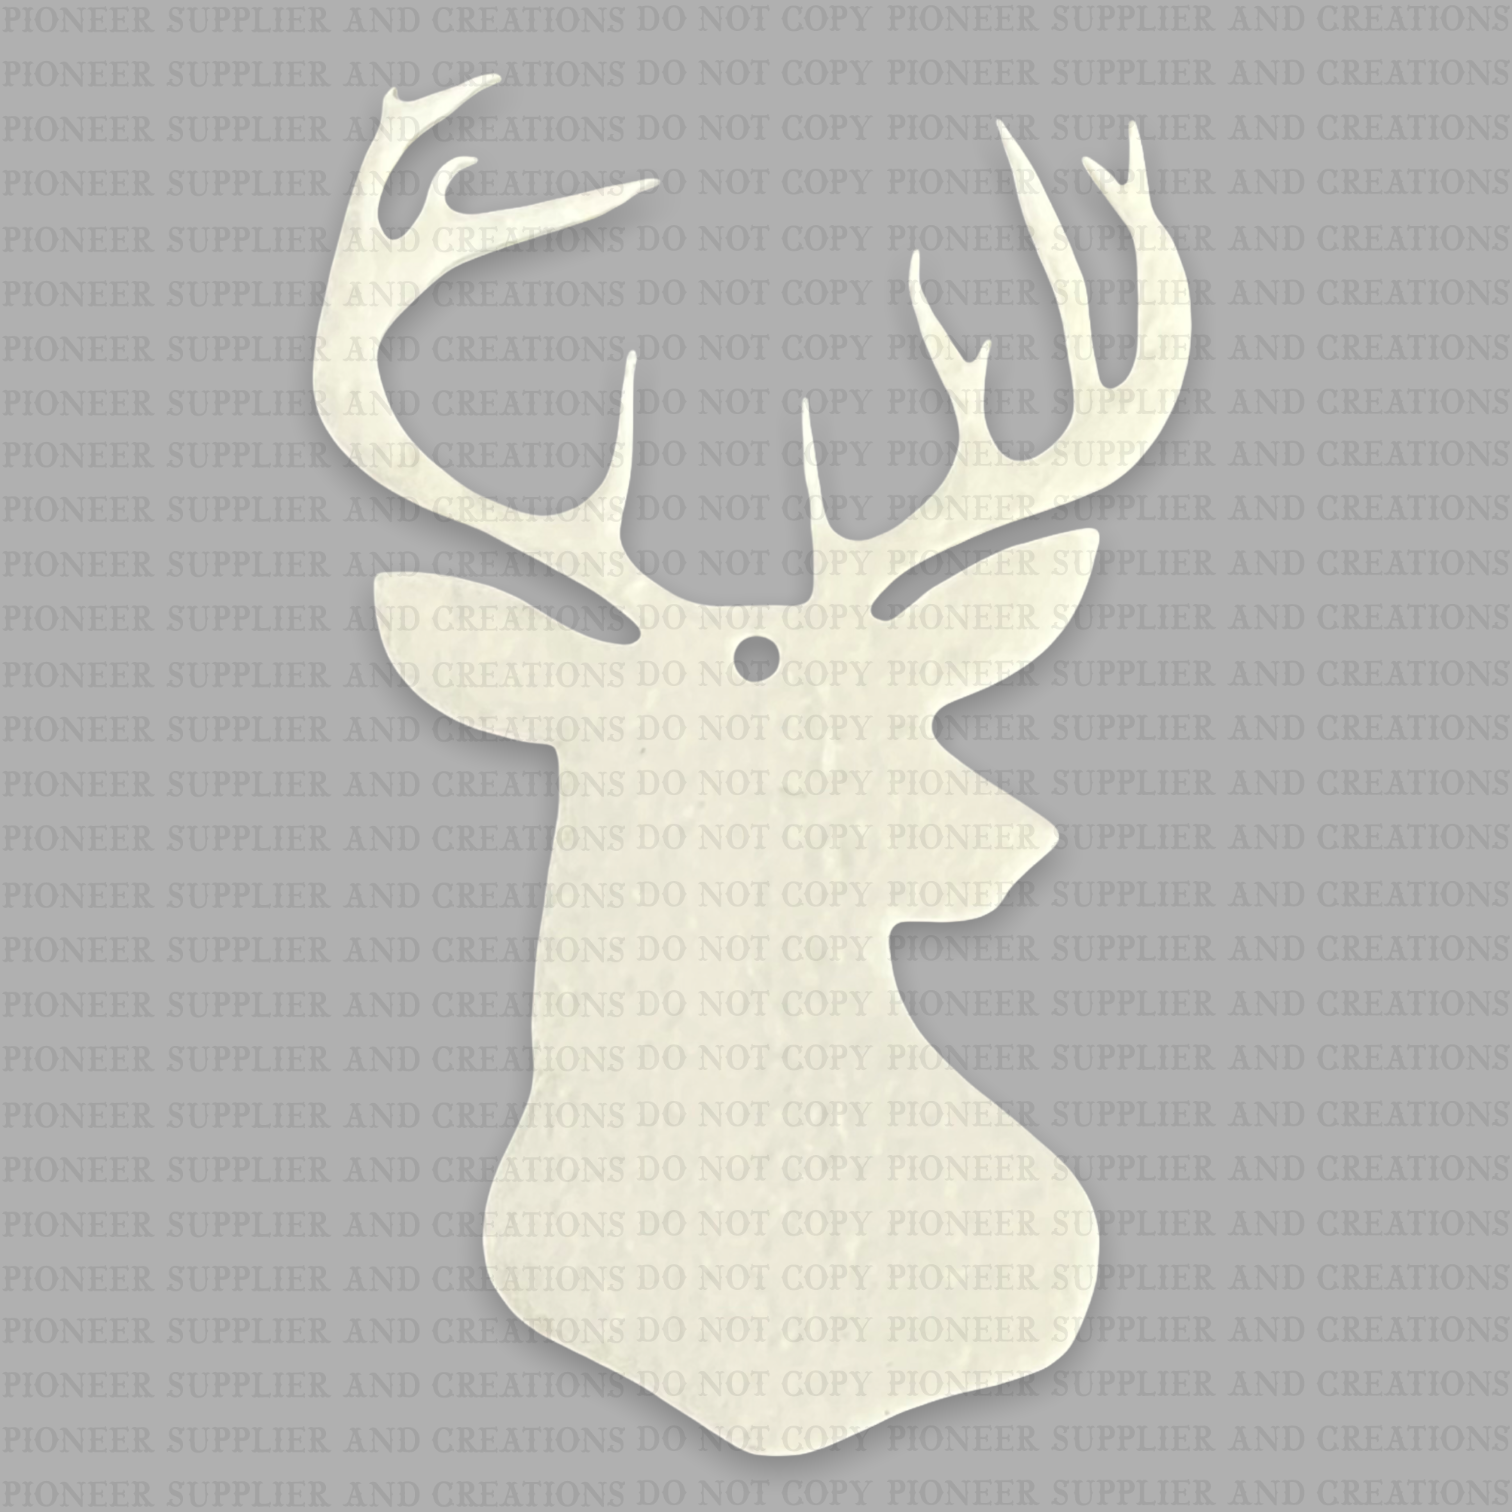 Deer with Horns Shaped Air Freshener Sublimation  Blank - Pioneer Supplier & Creations